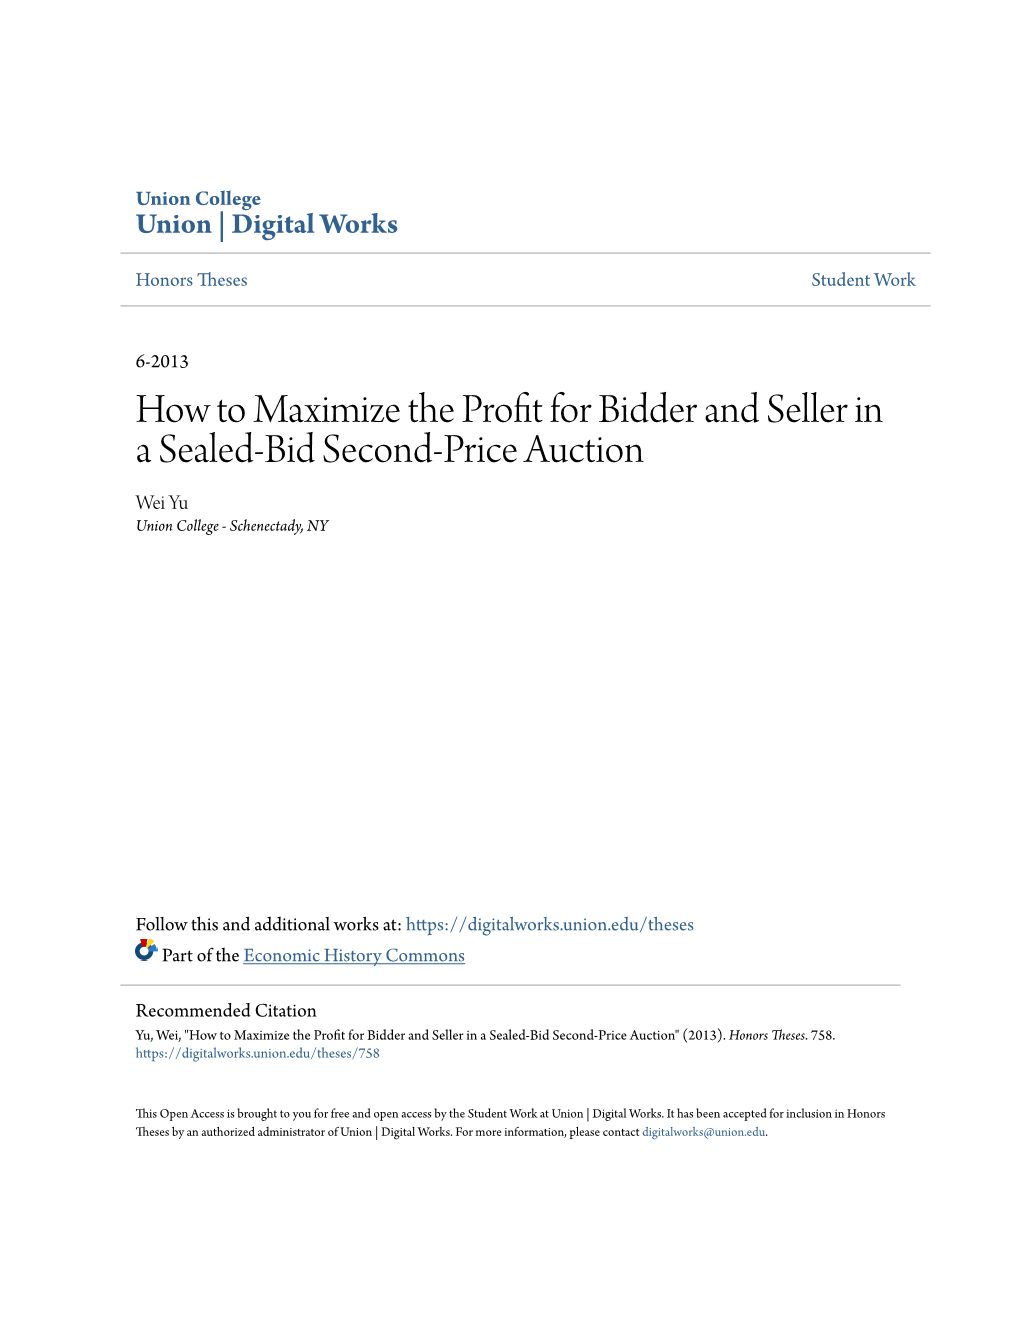 How to Maximize the Profit for Bidder and Seller in a Sealed-Bid Second-Price Auction